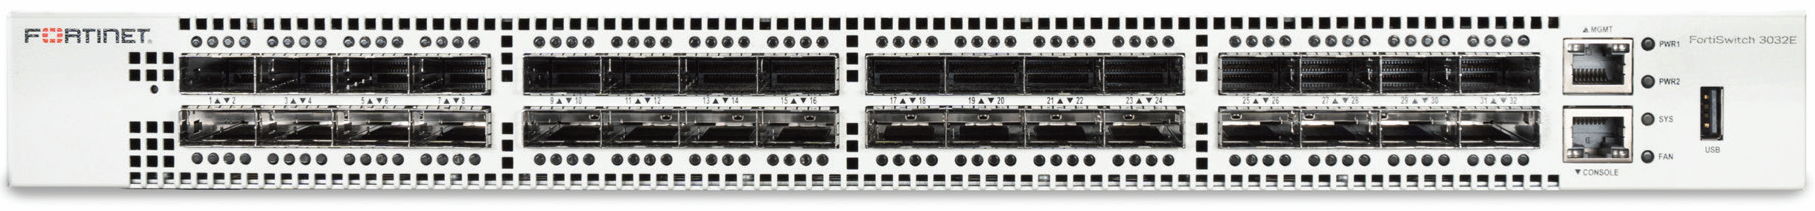 Fortinet FortiSwitch-3032E